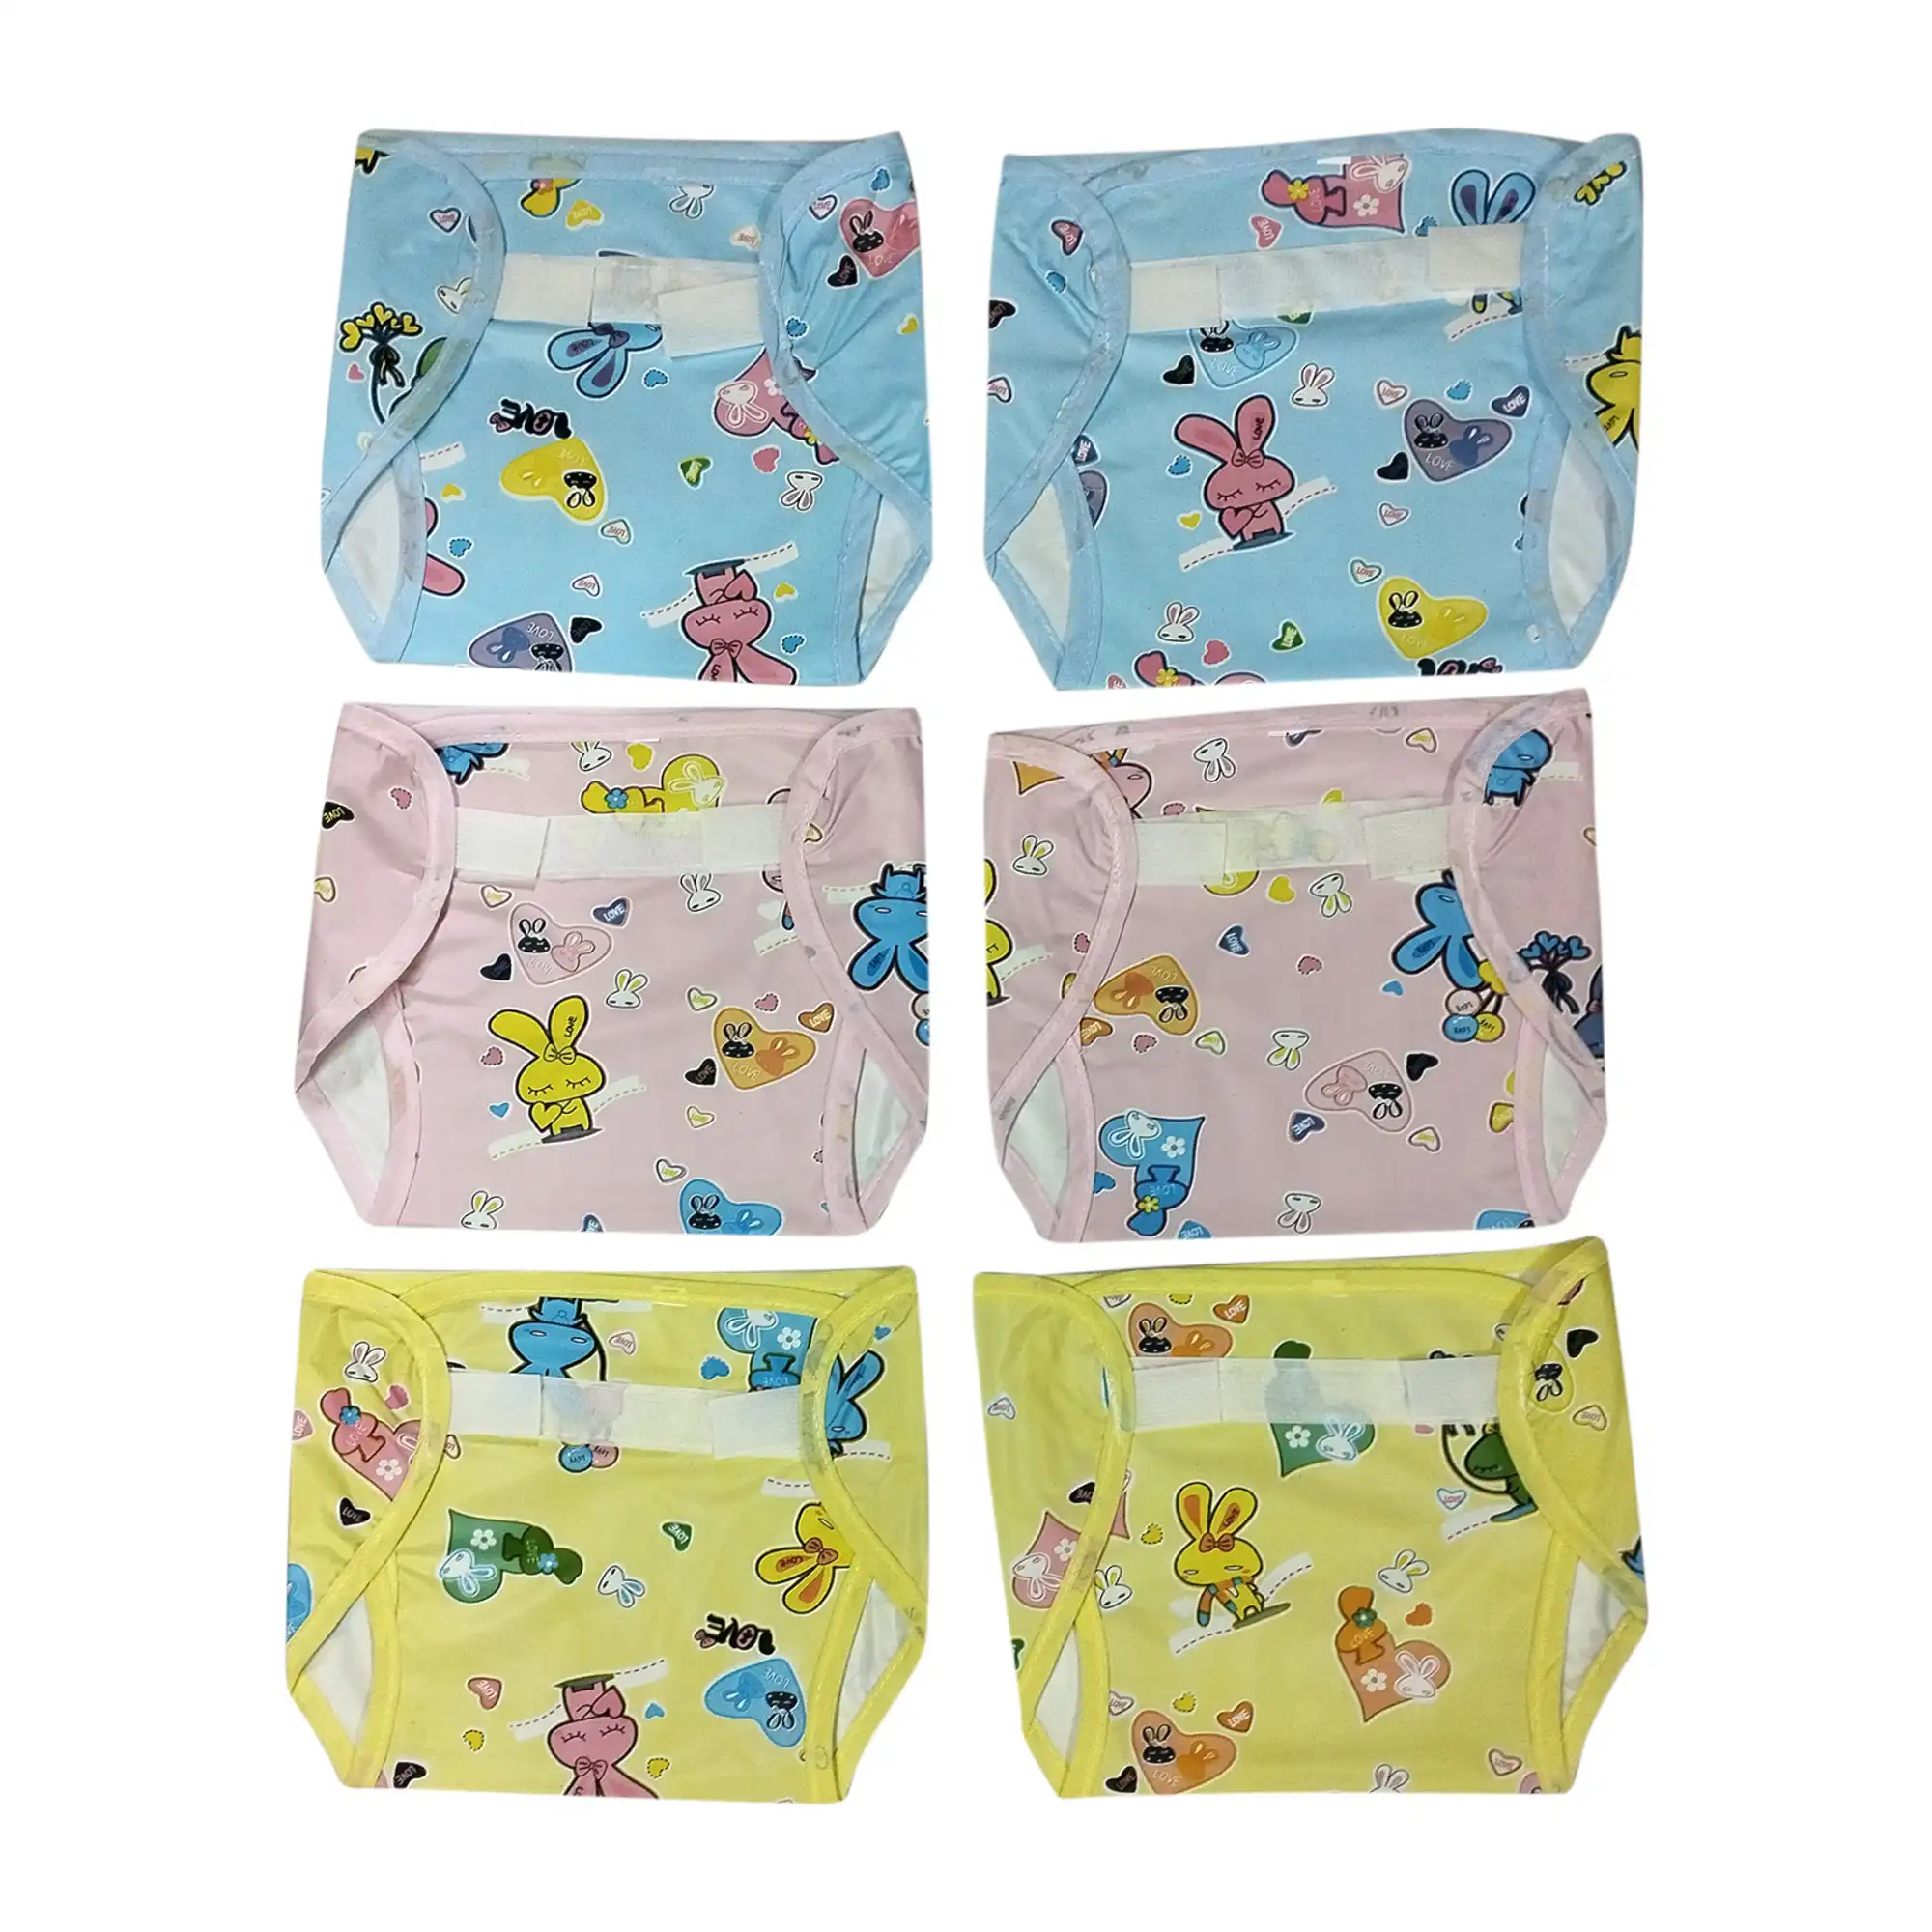 Newborn Imported Plastic Baby Diapers Set of 6 7